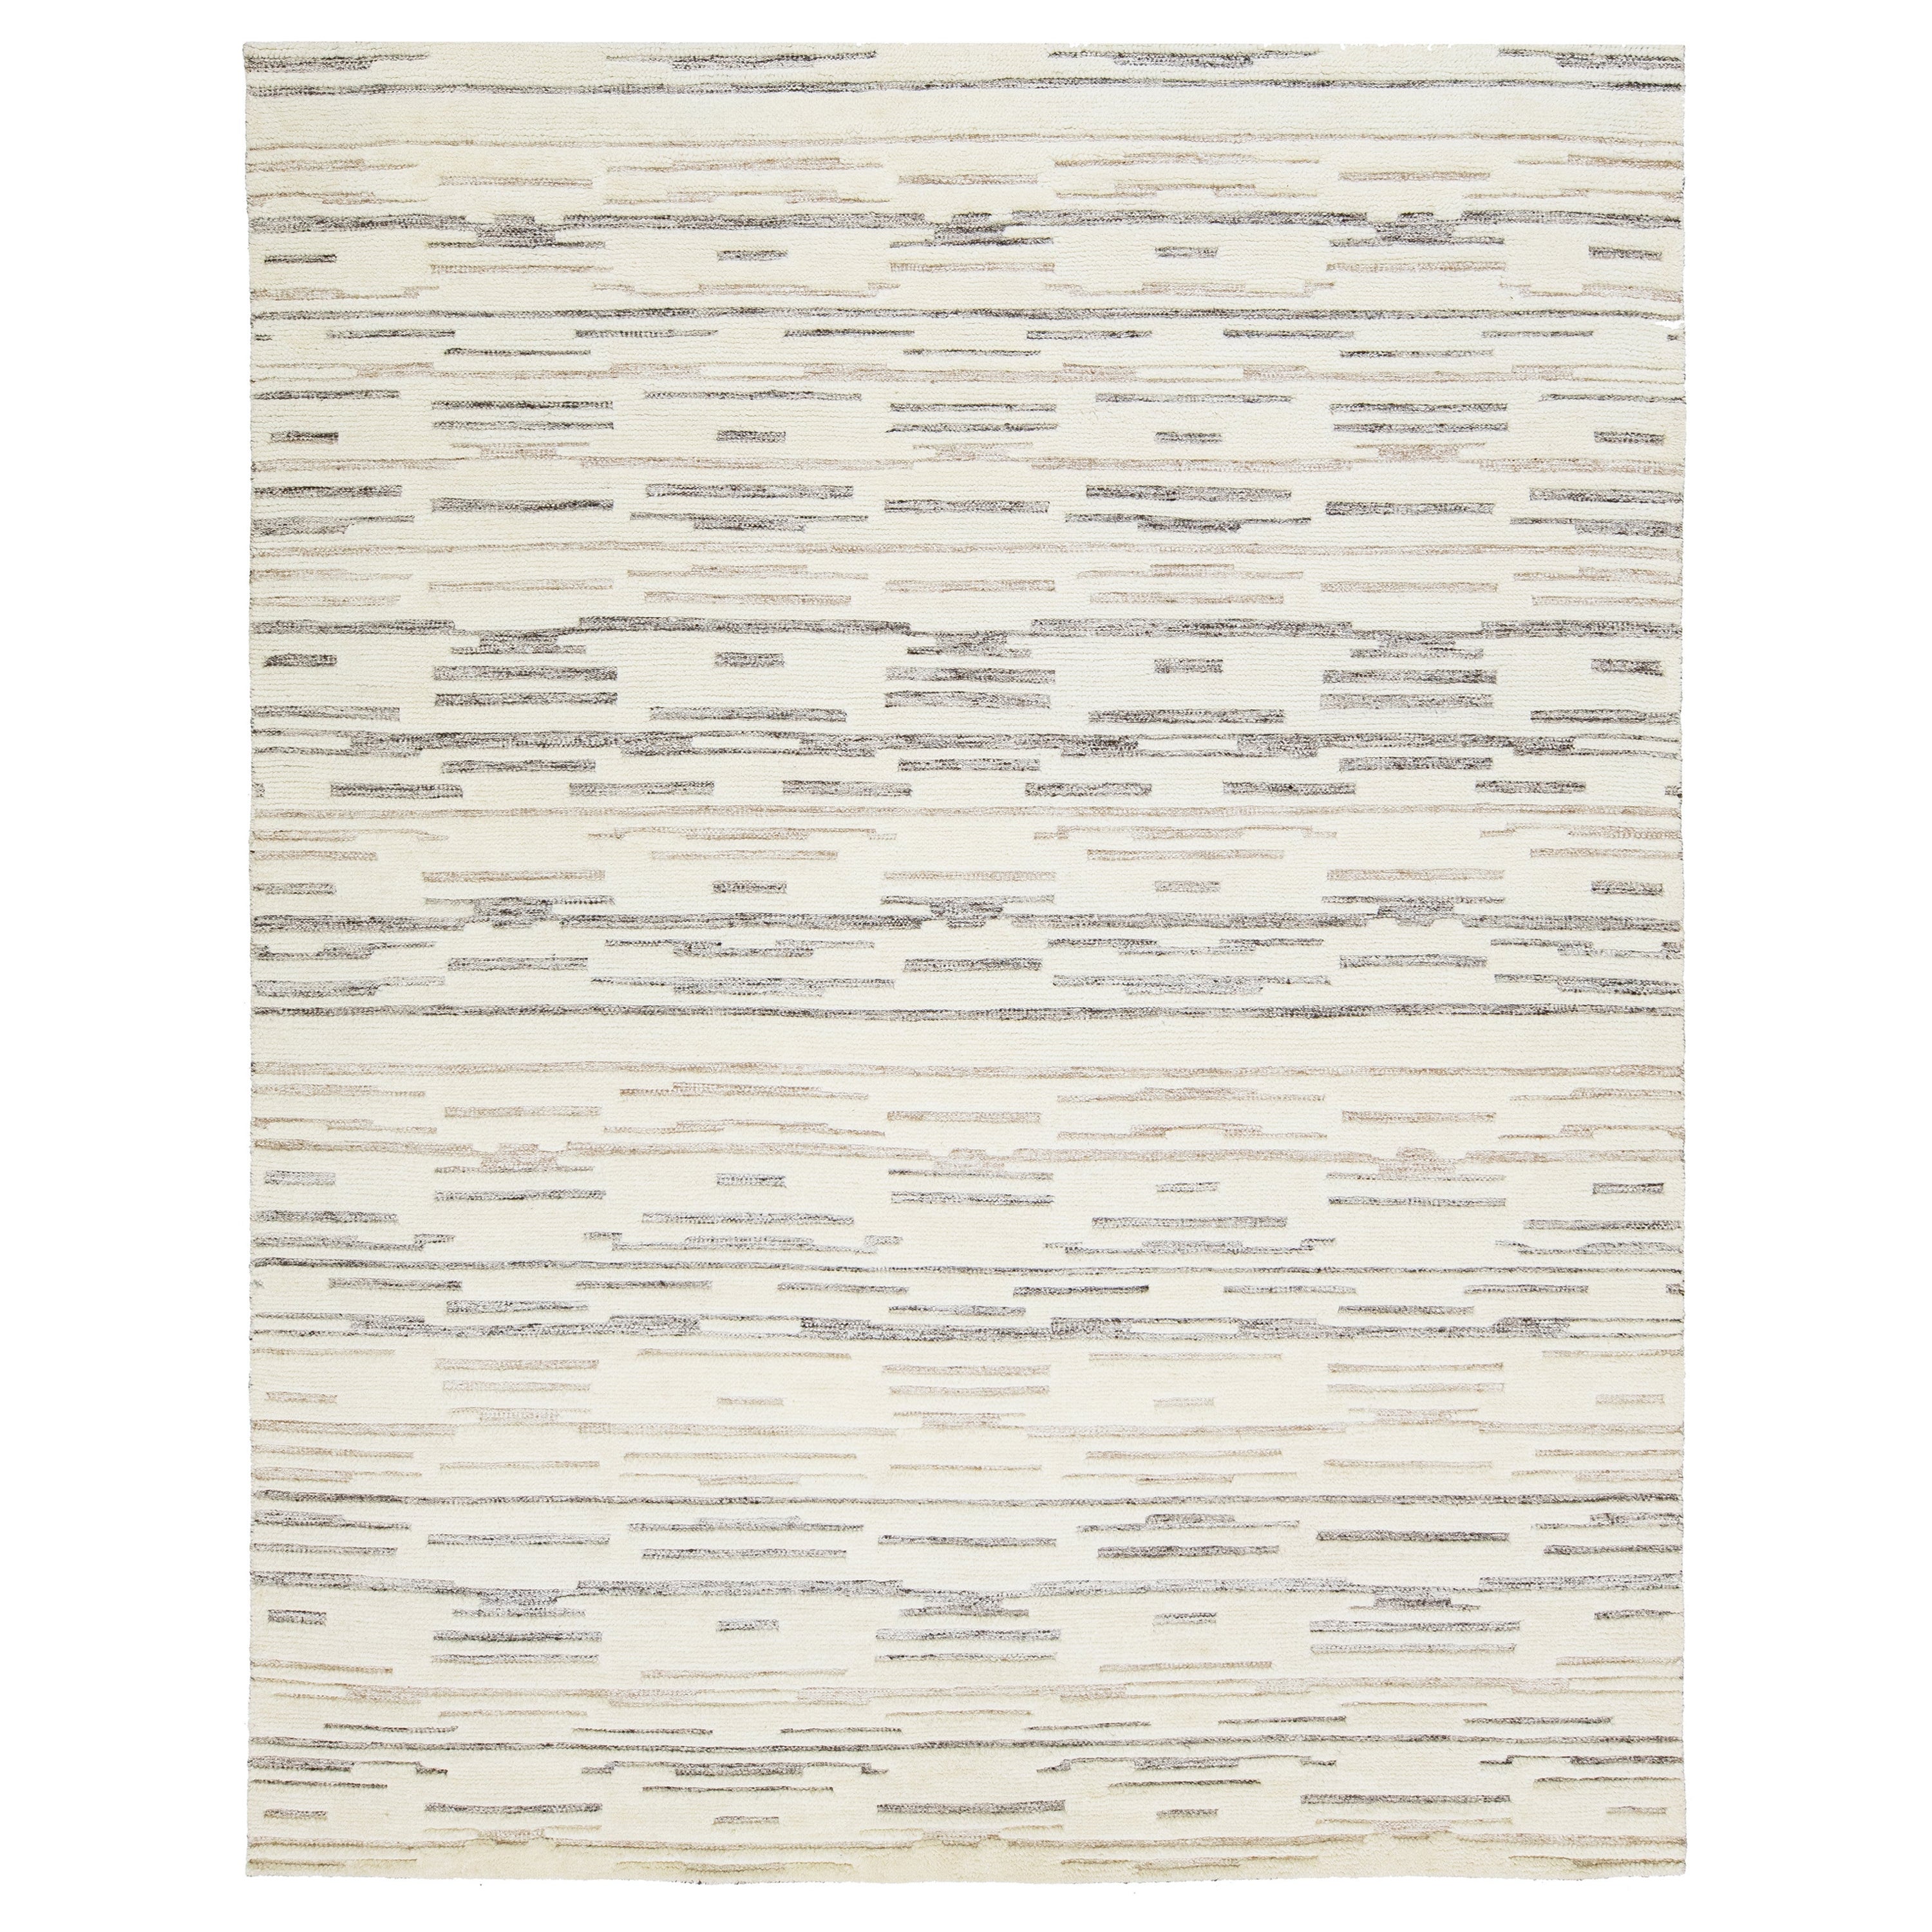 Apadana's Contemporary Moroccan-Style Ivory Wool Rug With a Striped Pattern 